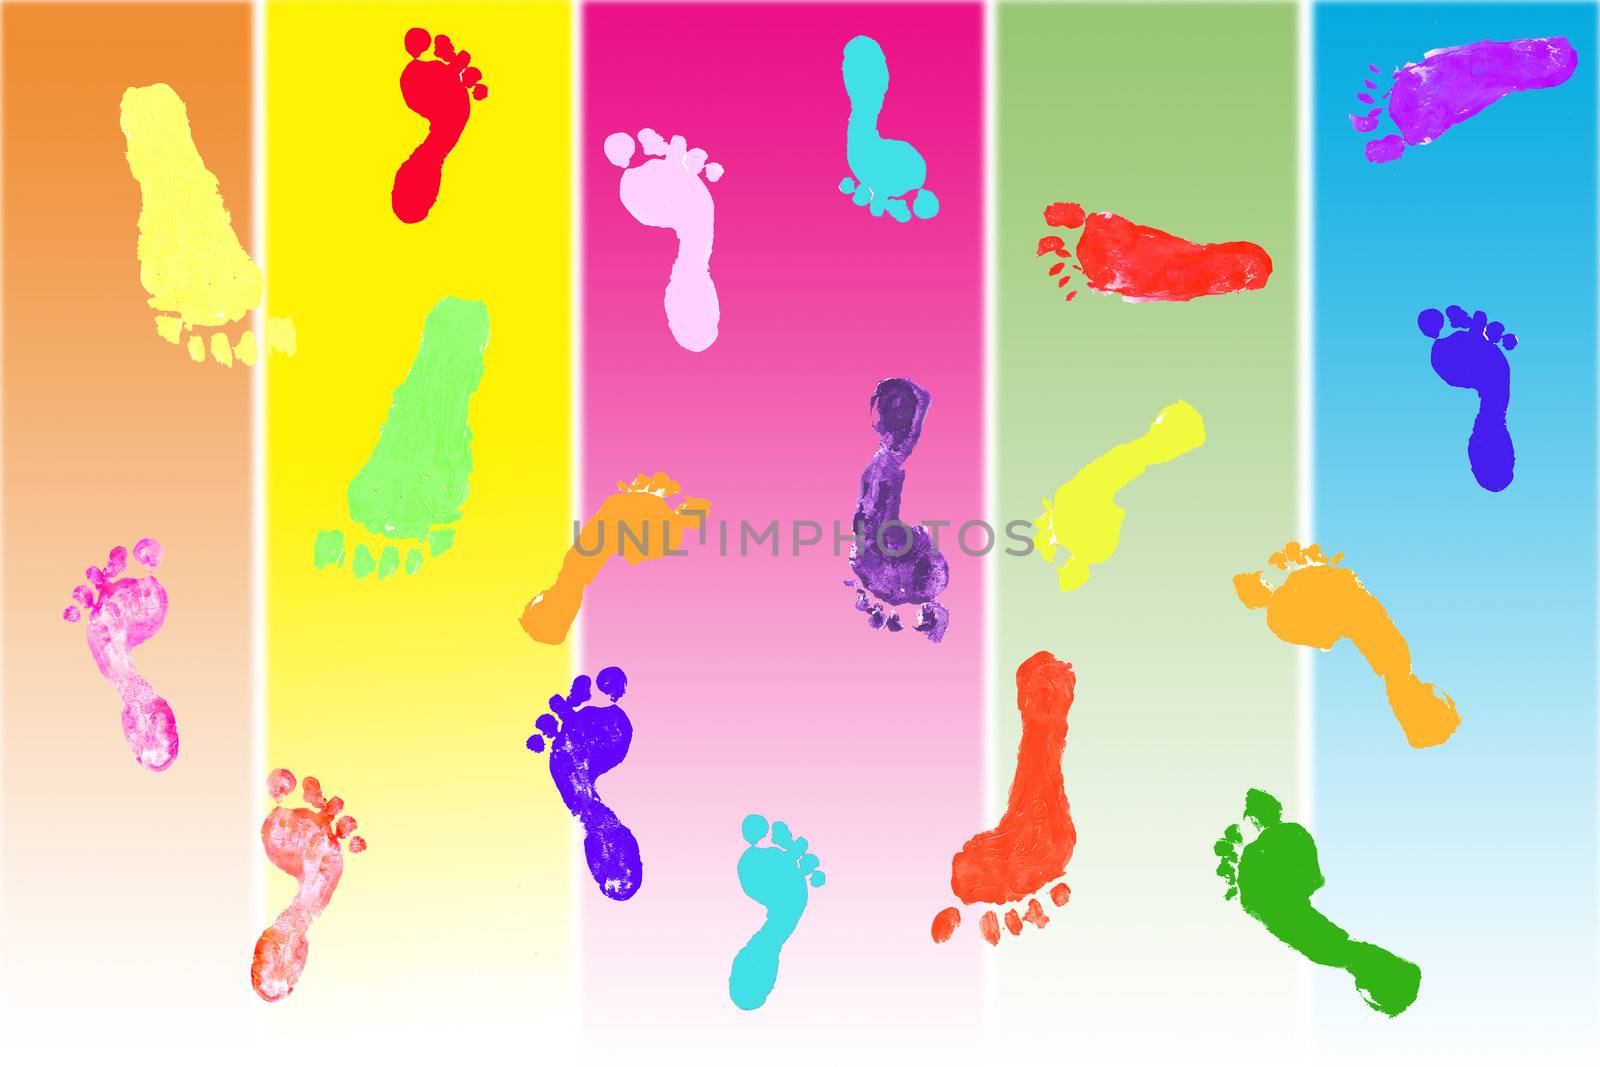 Actual footprints made by children on colorful background